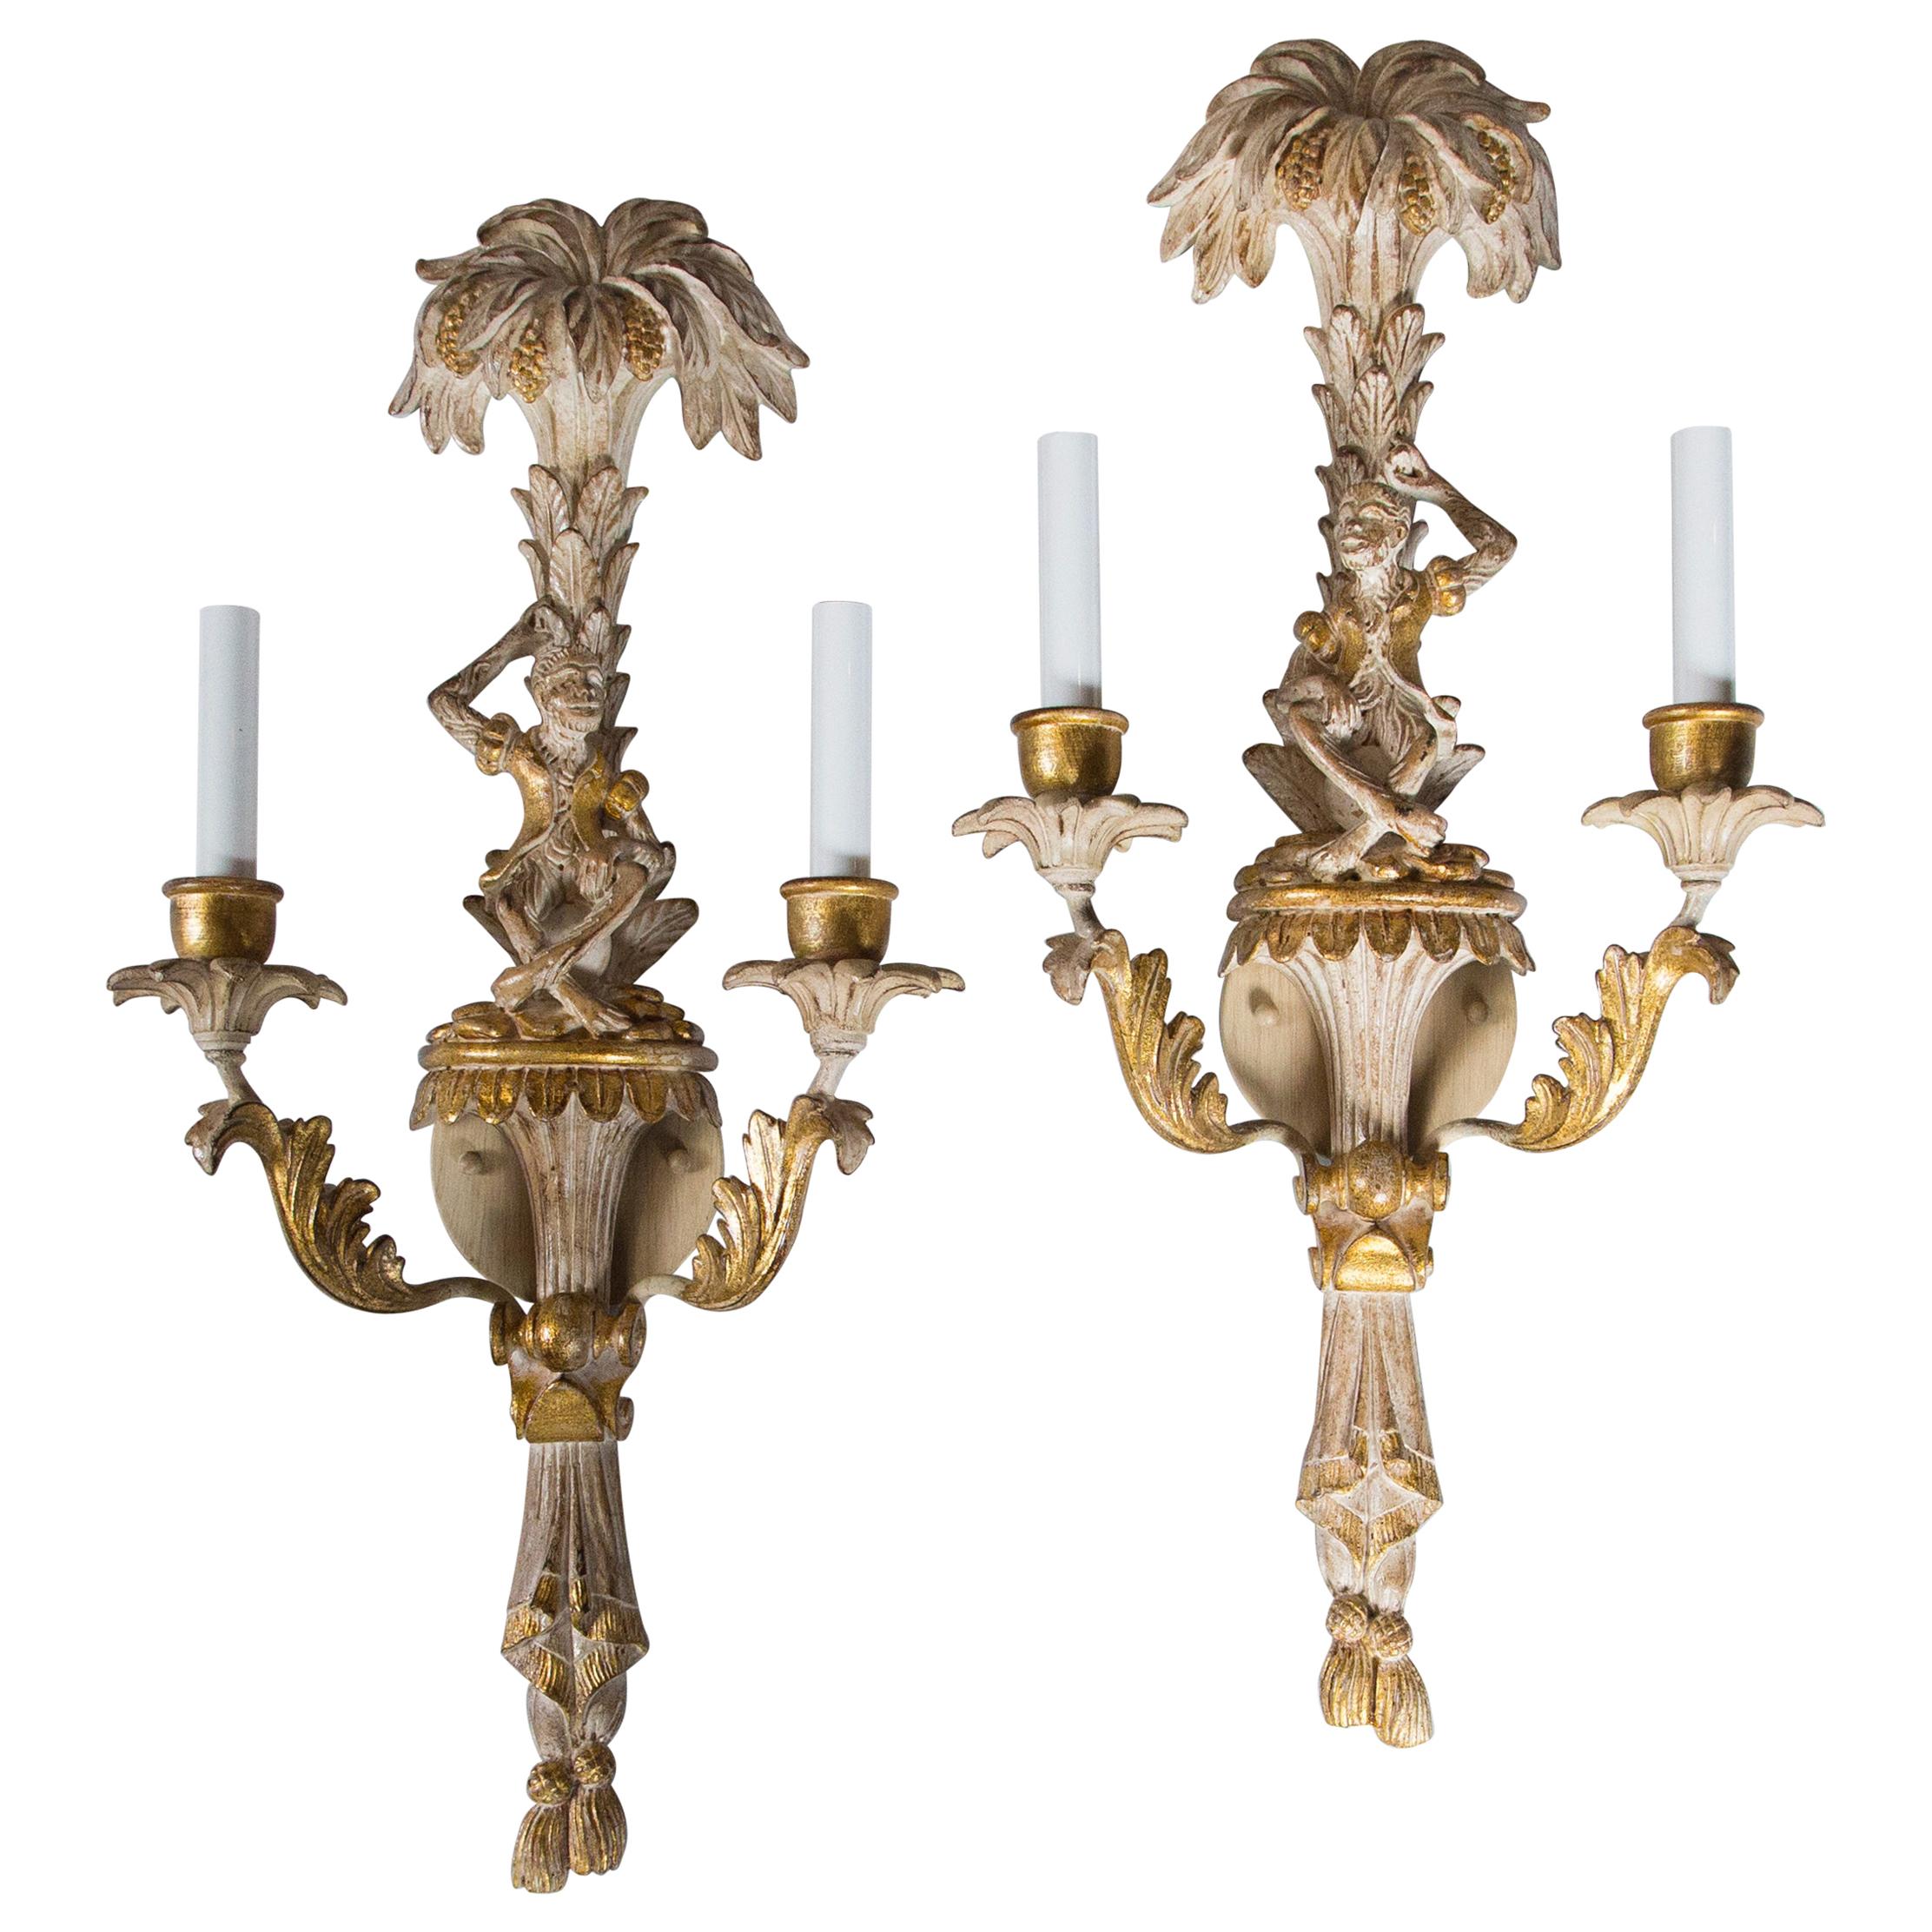 Pair of Italian Carved Wood Chinoiserie Sconces with Monkeys and Palms